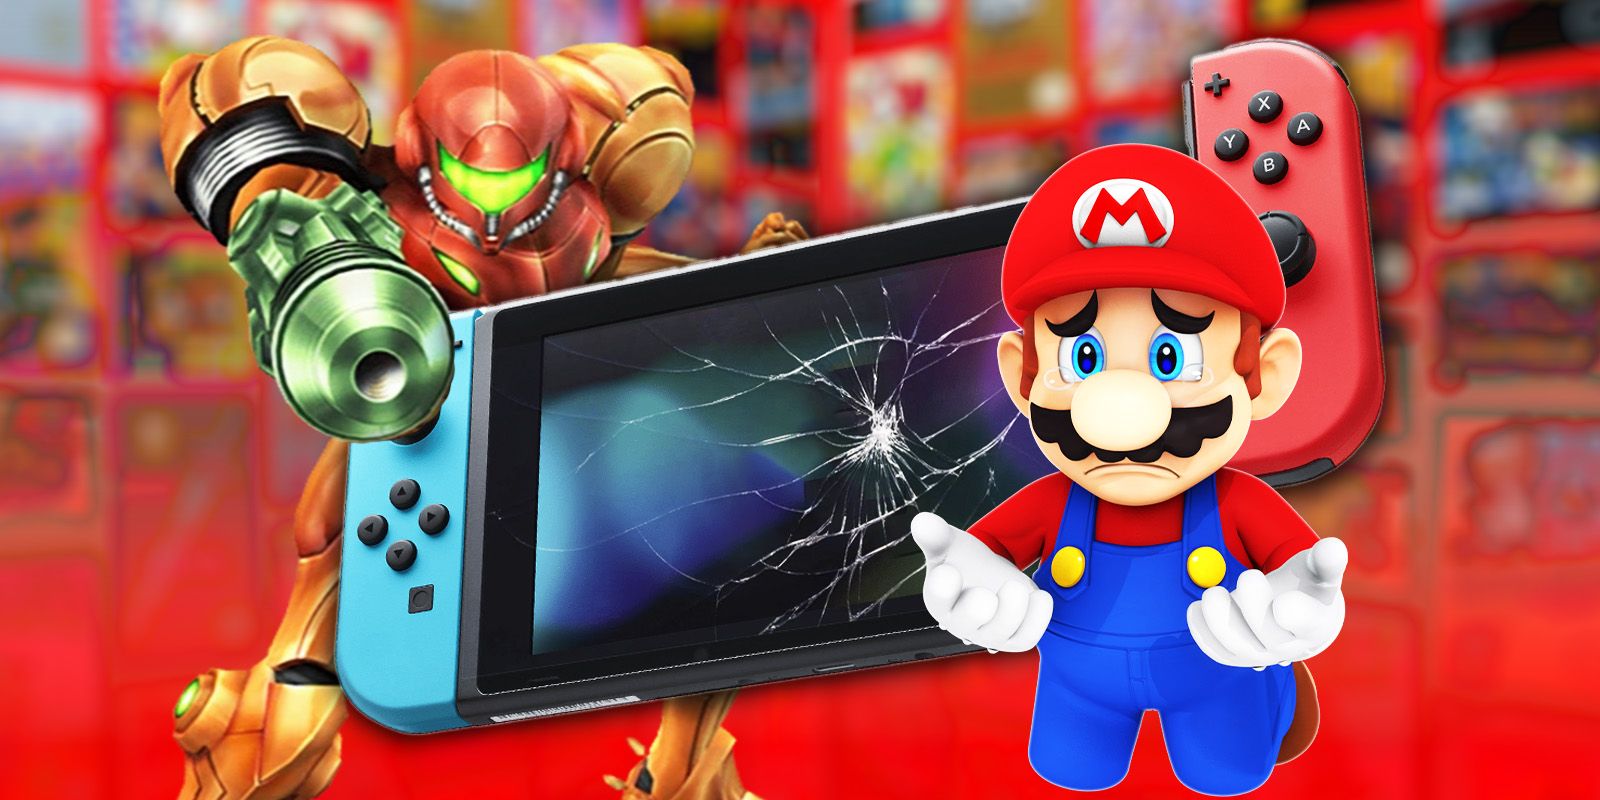 A shattered Nintendo Switch with Mario with a tear coming down his eye and angry Samus.